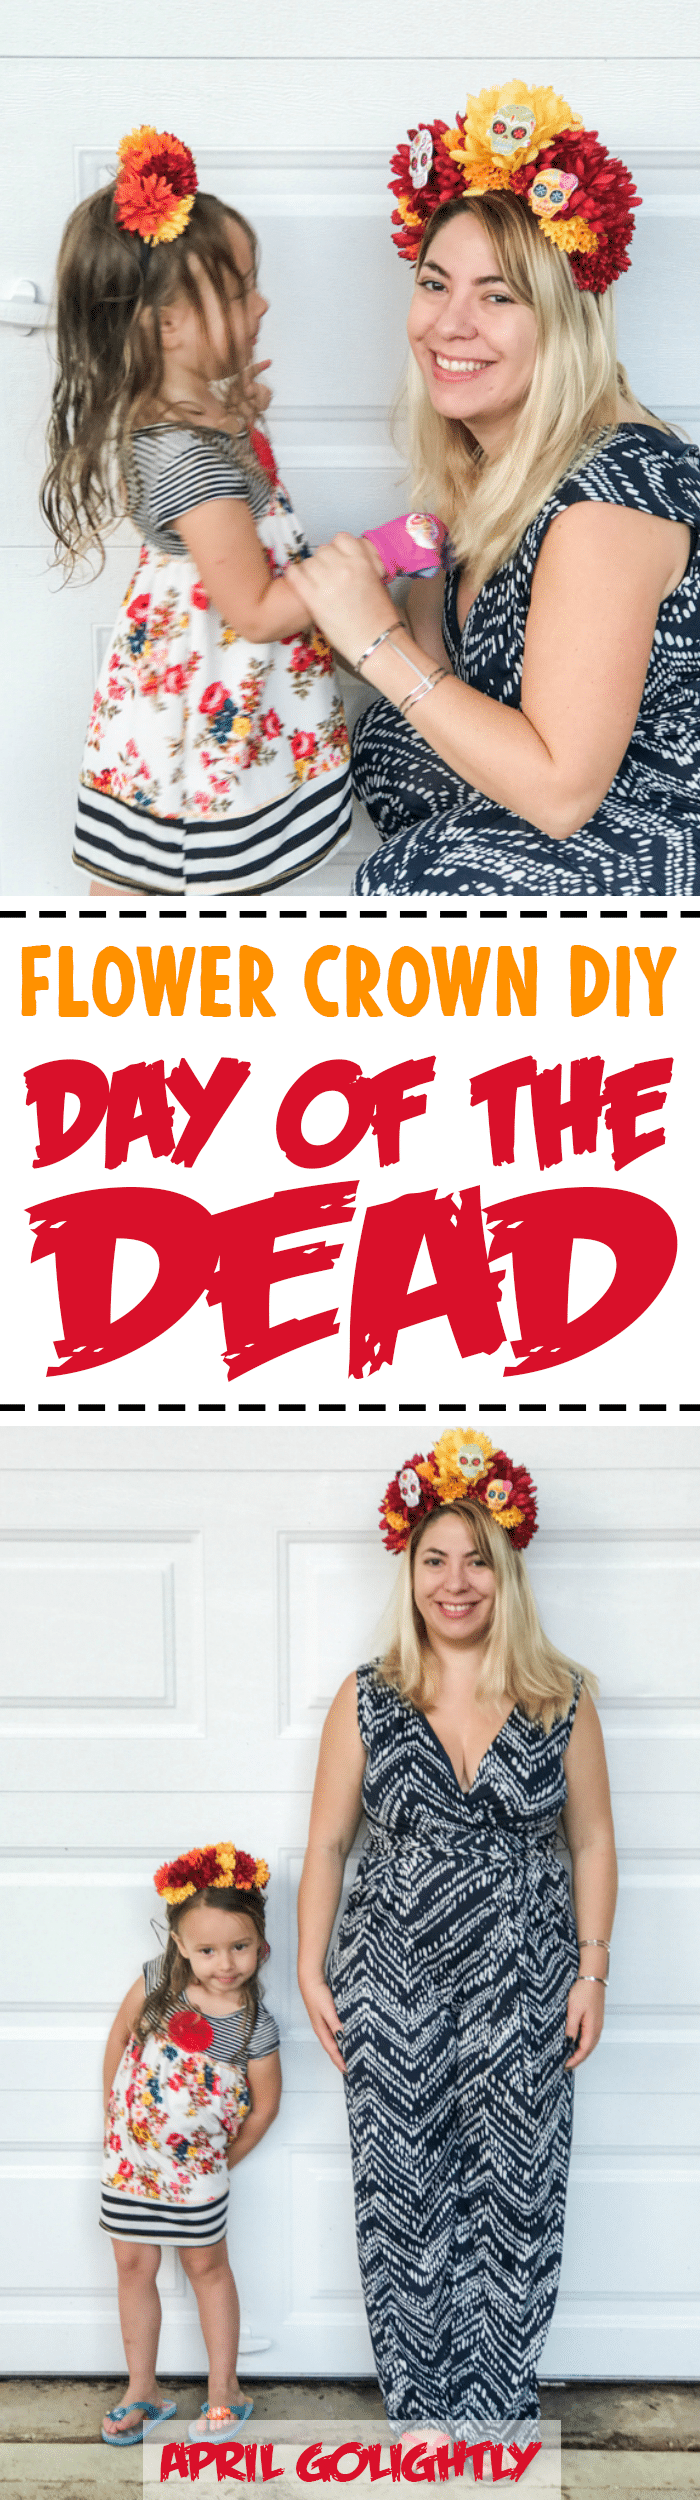 flower-crown-day-of-the-dead